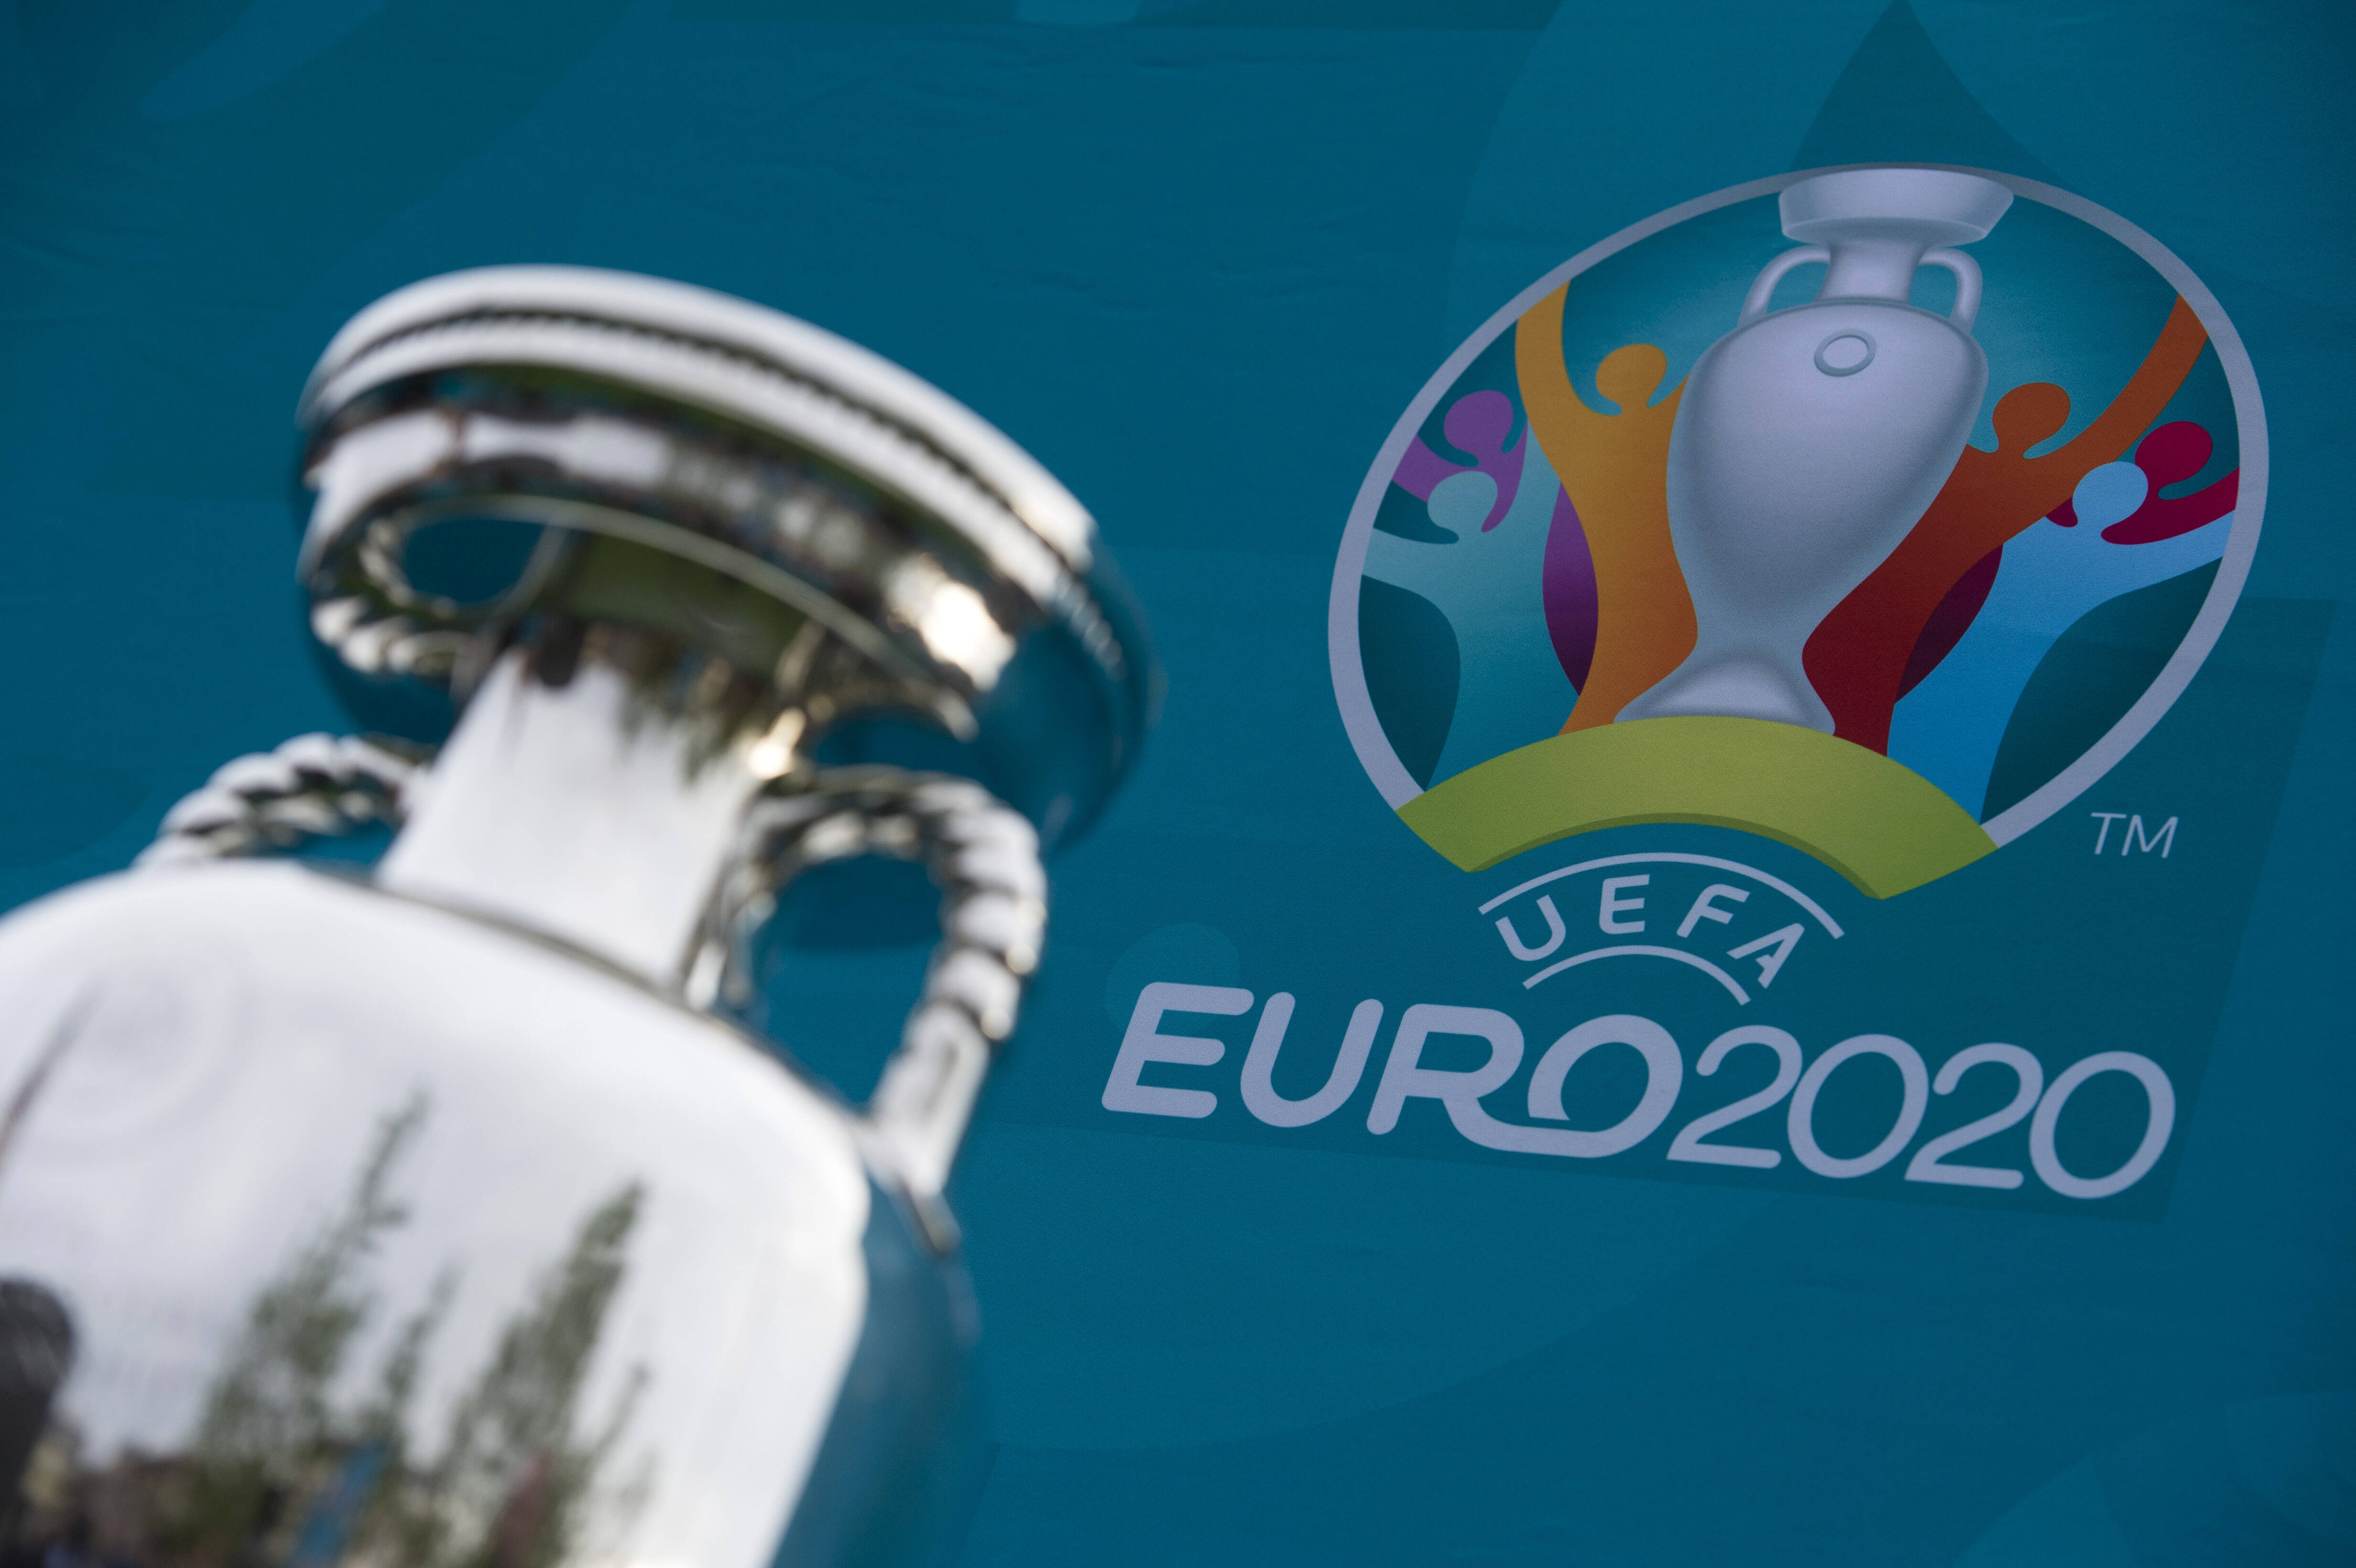 Euro 2020 Trophy Tour London The Henri Delaunay Cup, Which Made A Special Visit To London Today As Part Of The Uefa E